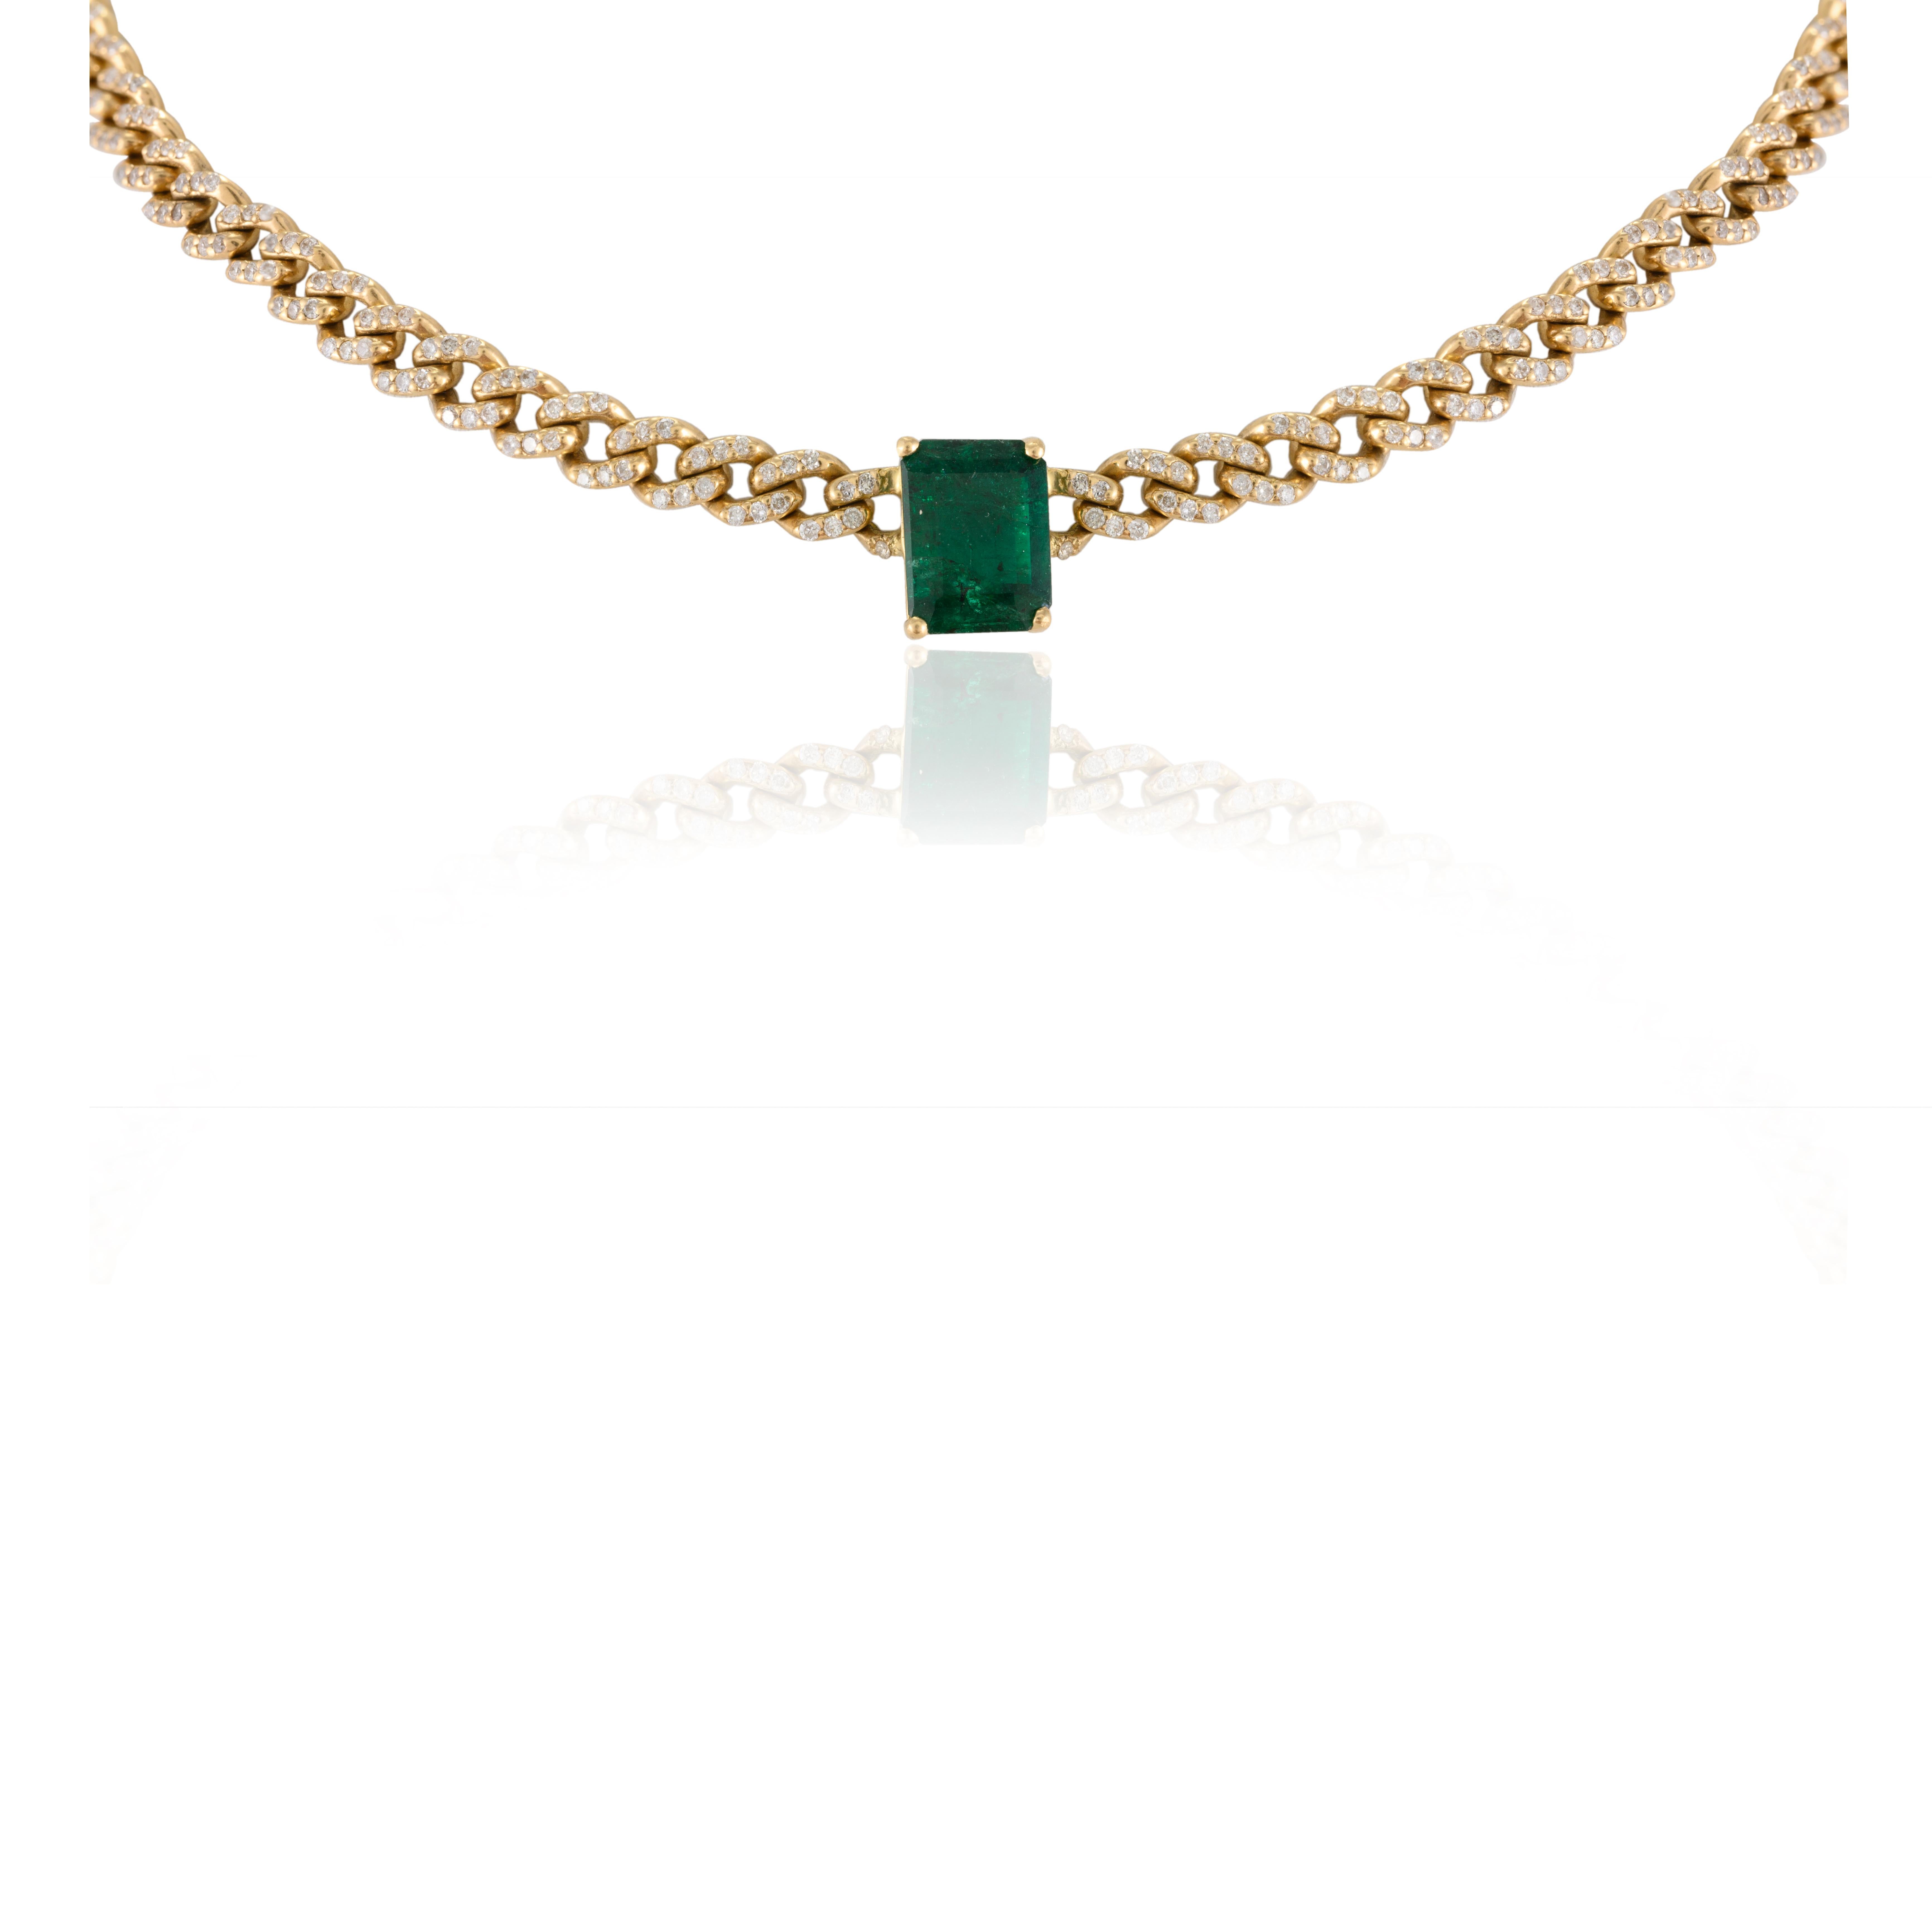 Statement Emerald Diamond Choker Necklace in 18K Gold studded with octagon cut emerald and diamonds studded on chain. This stunning piece of jewelry instantly elevates a casual look or dressy outfit. 
Emerald enhances intellectual capacity of the